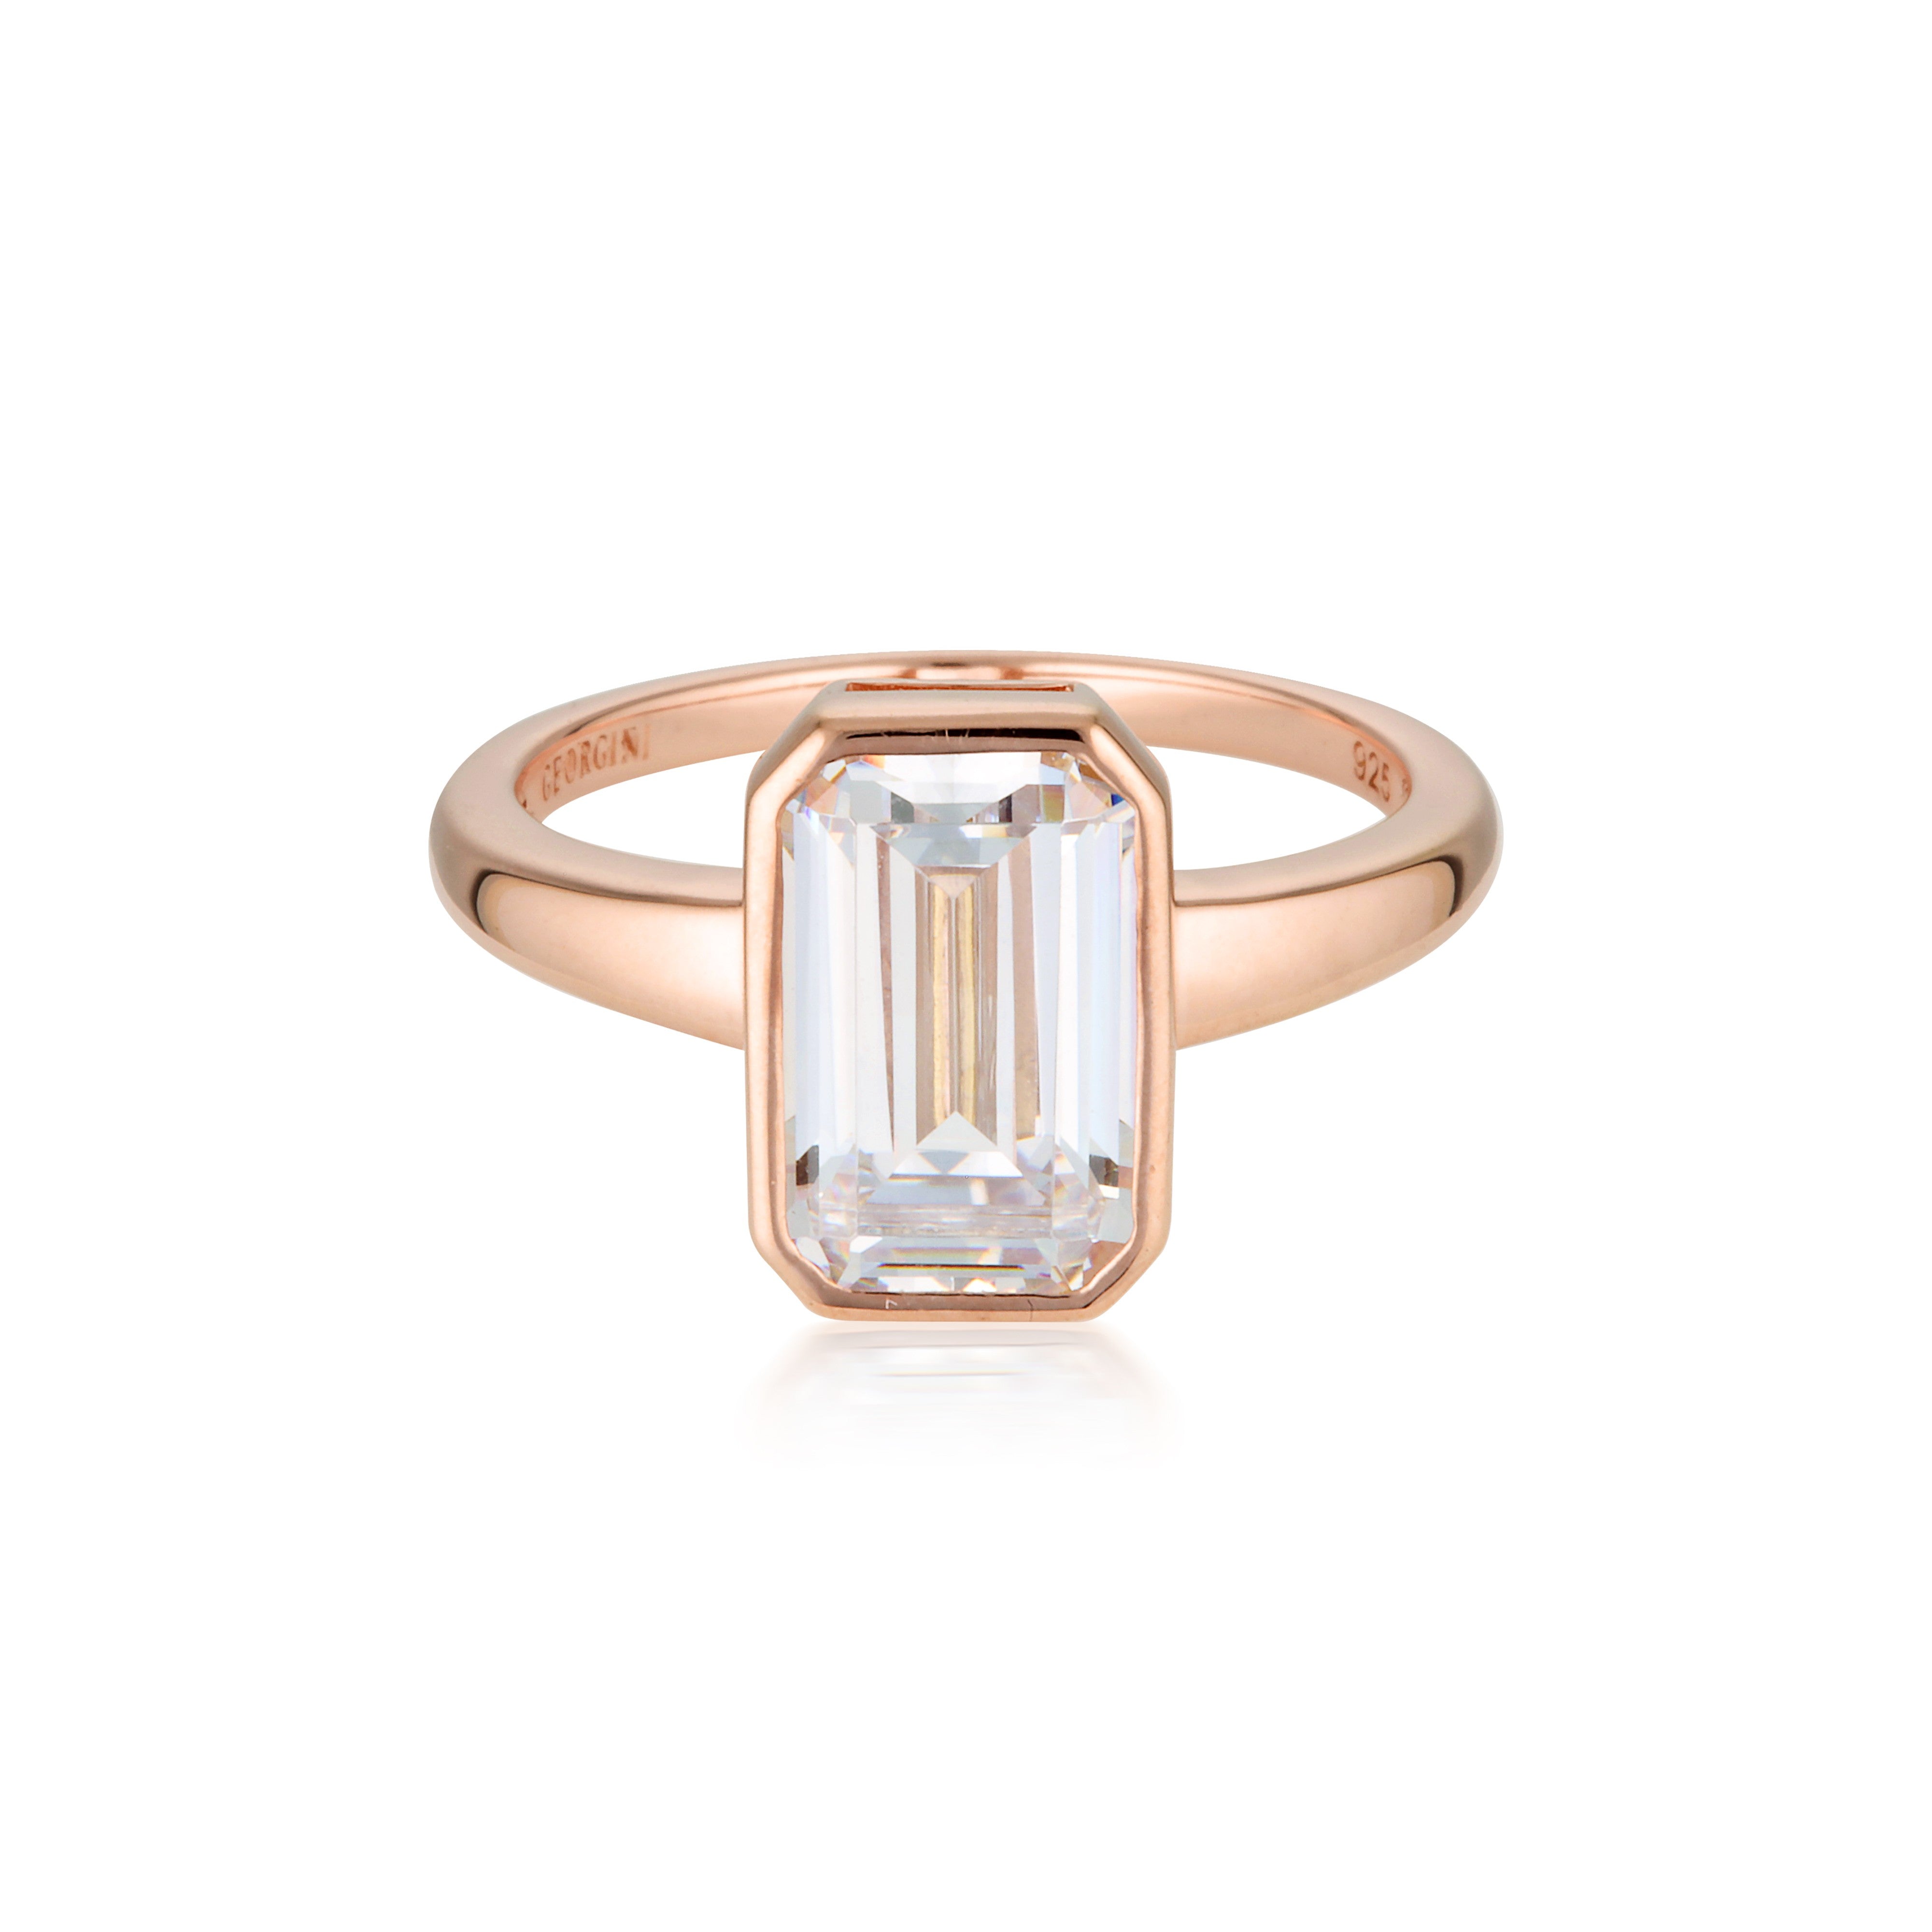 LUXE SONTUOSA RING ROSE GOLD